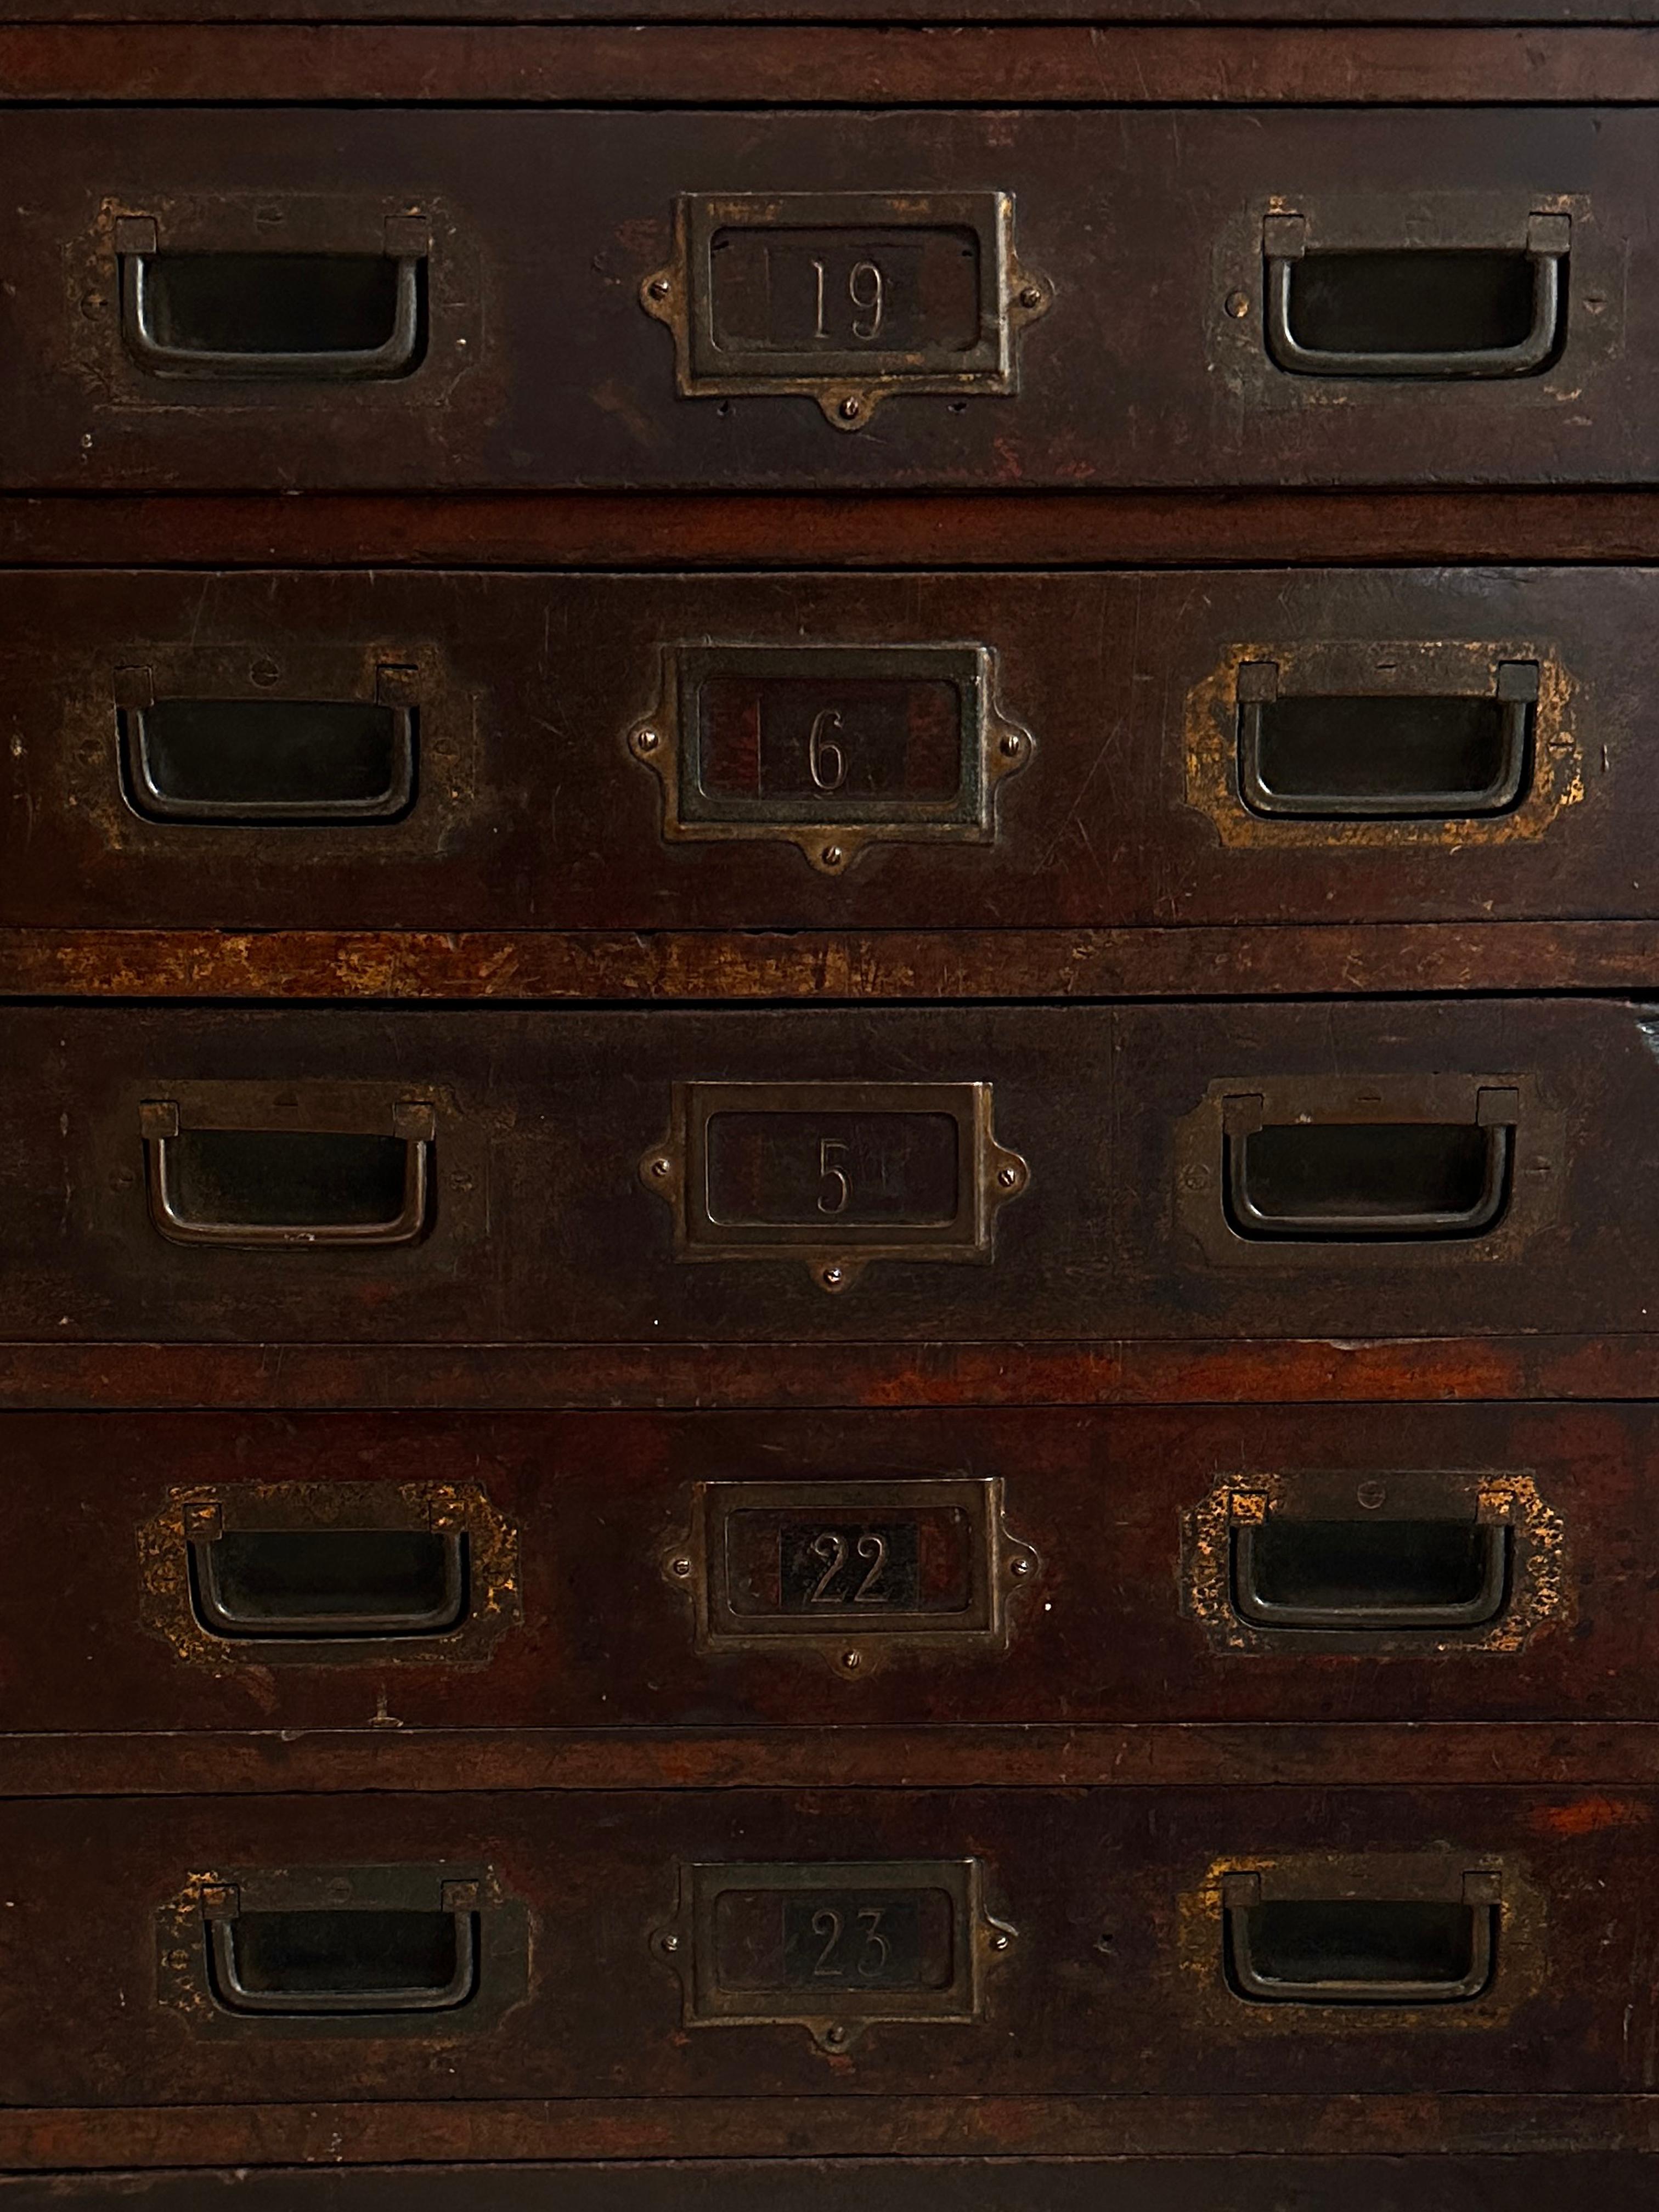 - A wonderful bank of mahogany military campaign drawers, English circa 1920.
- The drawers are of a fine heavy quality, beautifully crafted with dovetail joints and recessed military style brass handles.
- Each of the 16 drawers still retain